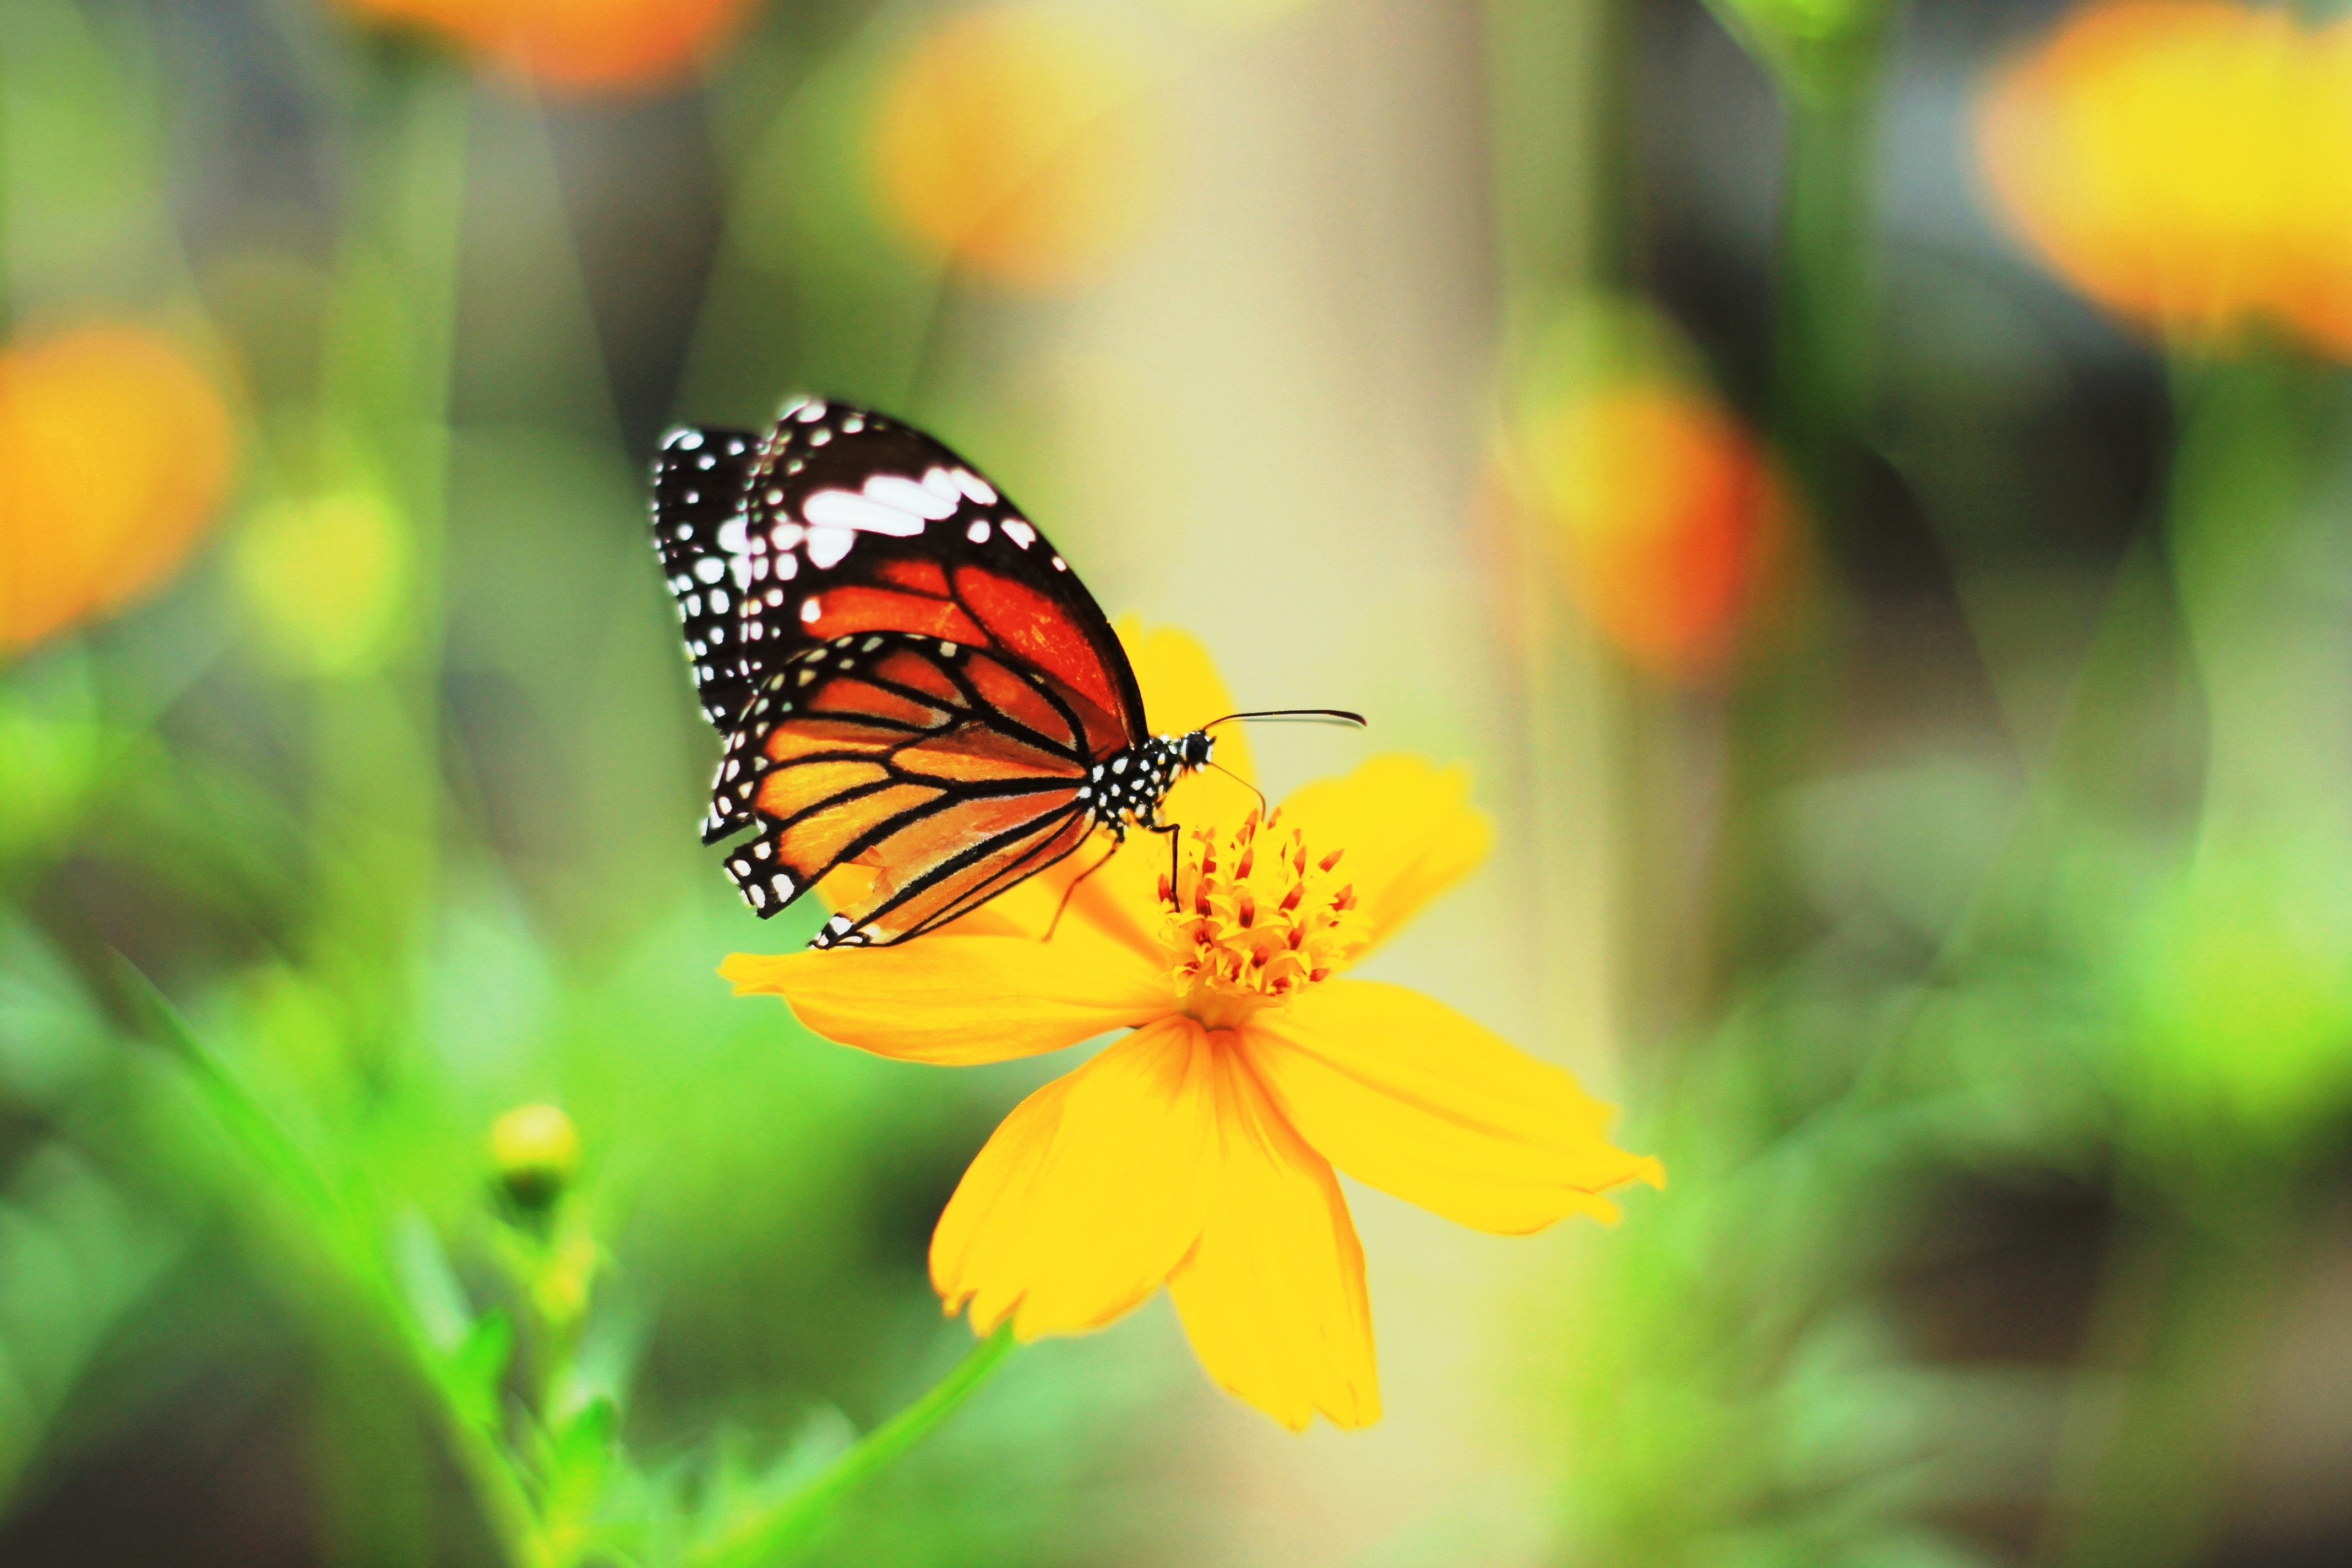 yellow petaled flower and white black and red butterfly